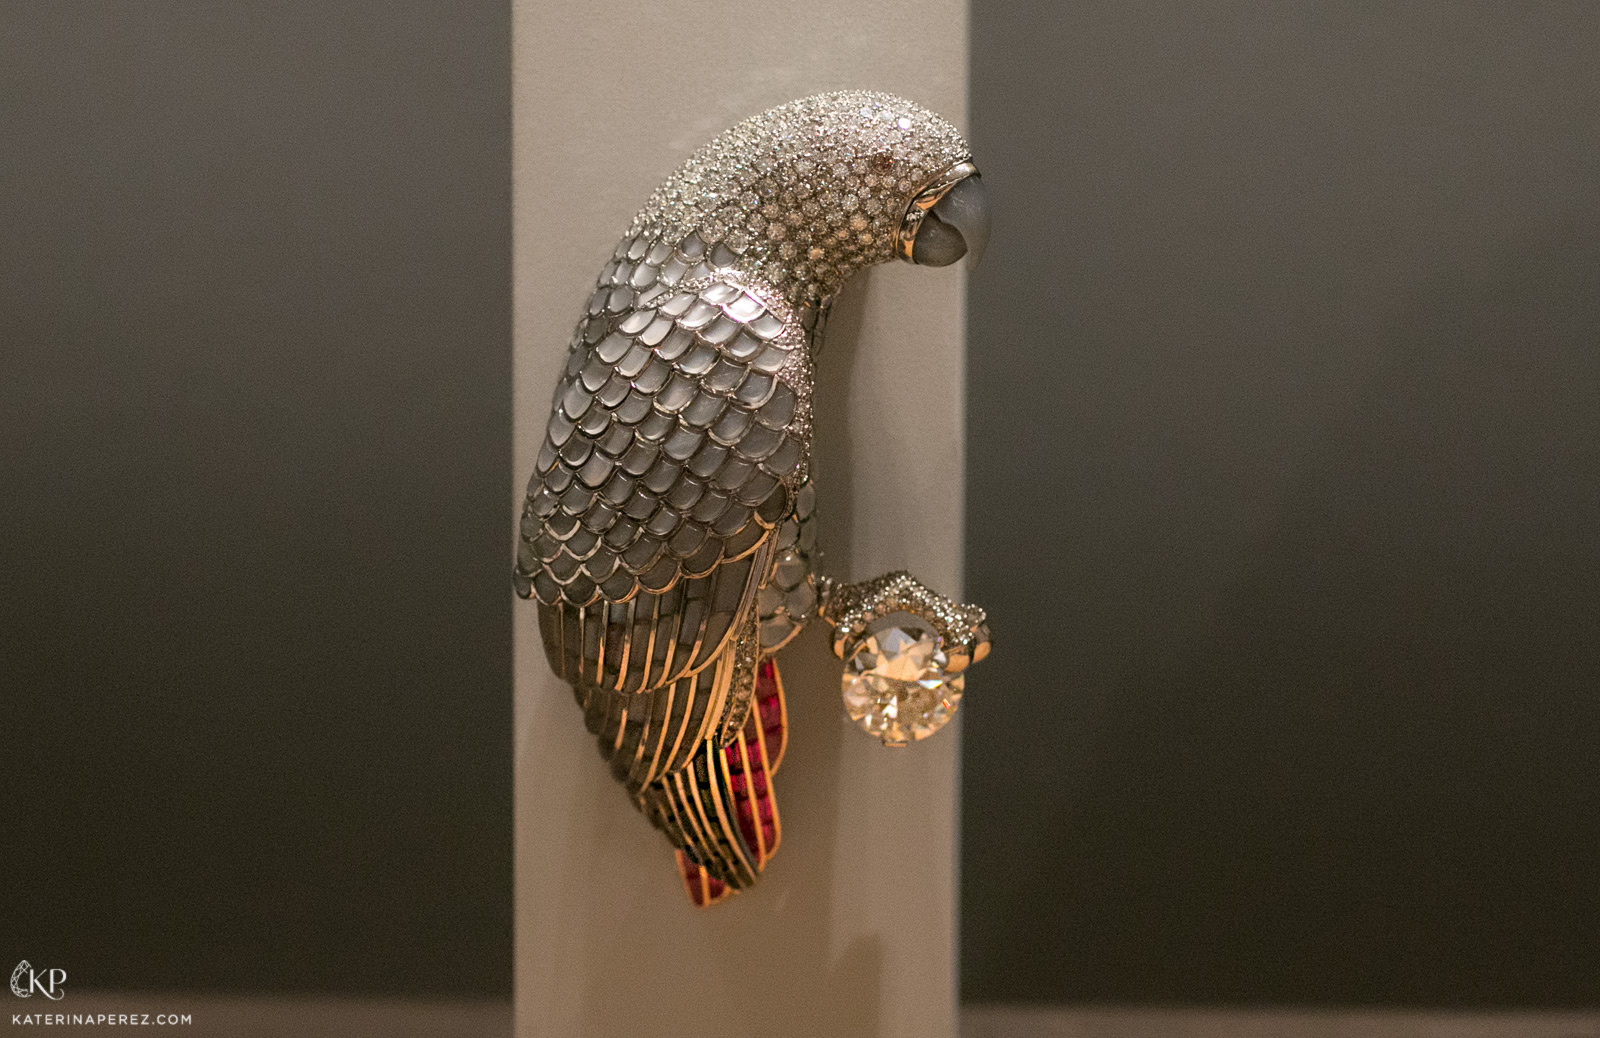 Hemmerle Parrot brooch with diamonds, rubies and moonstones